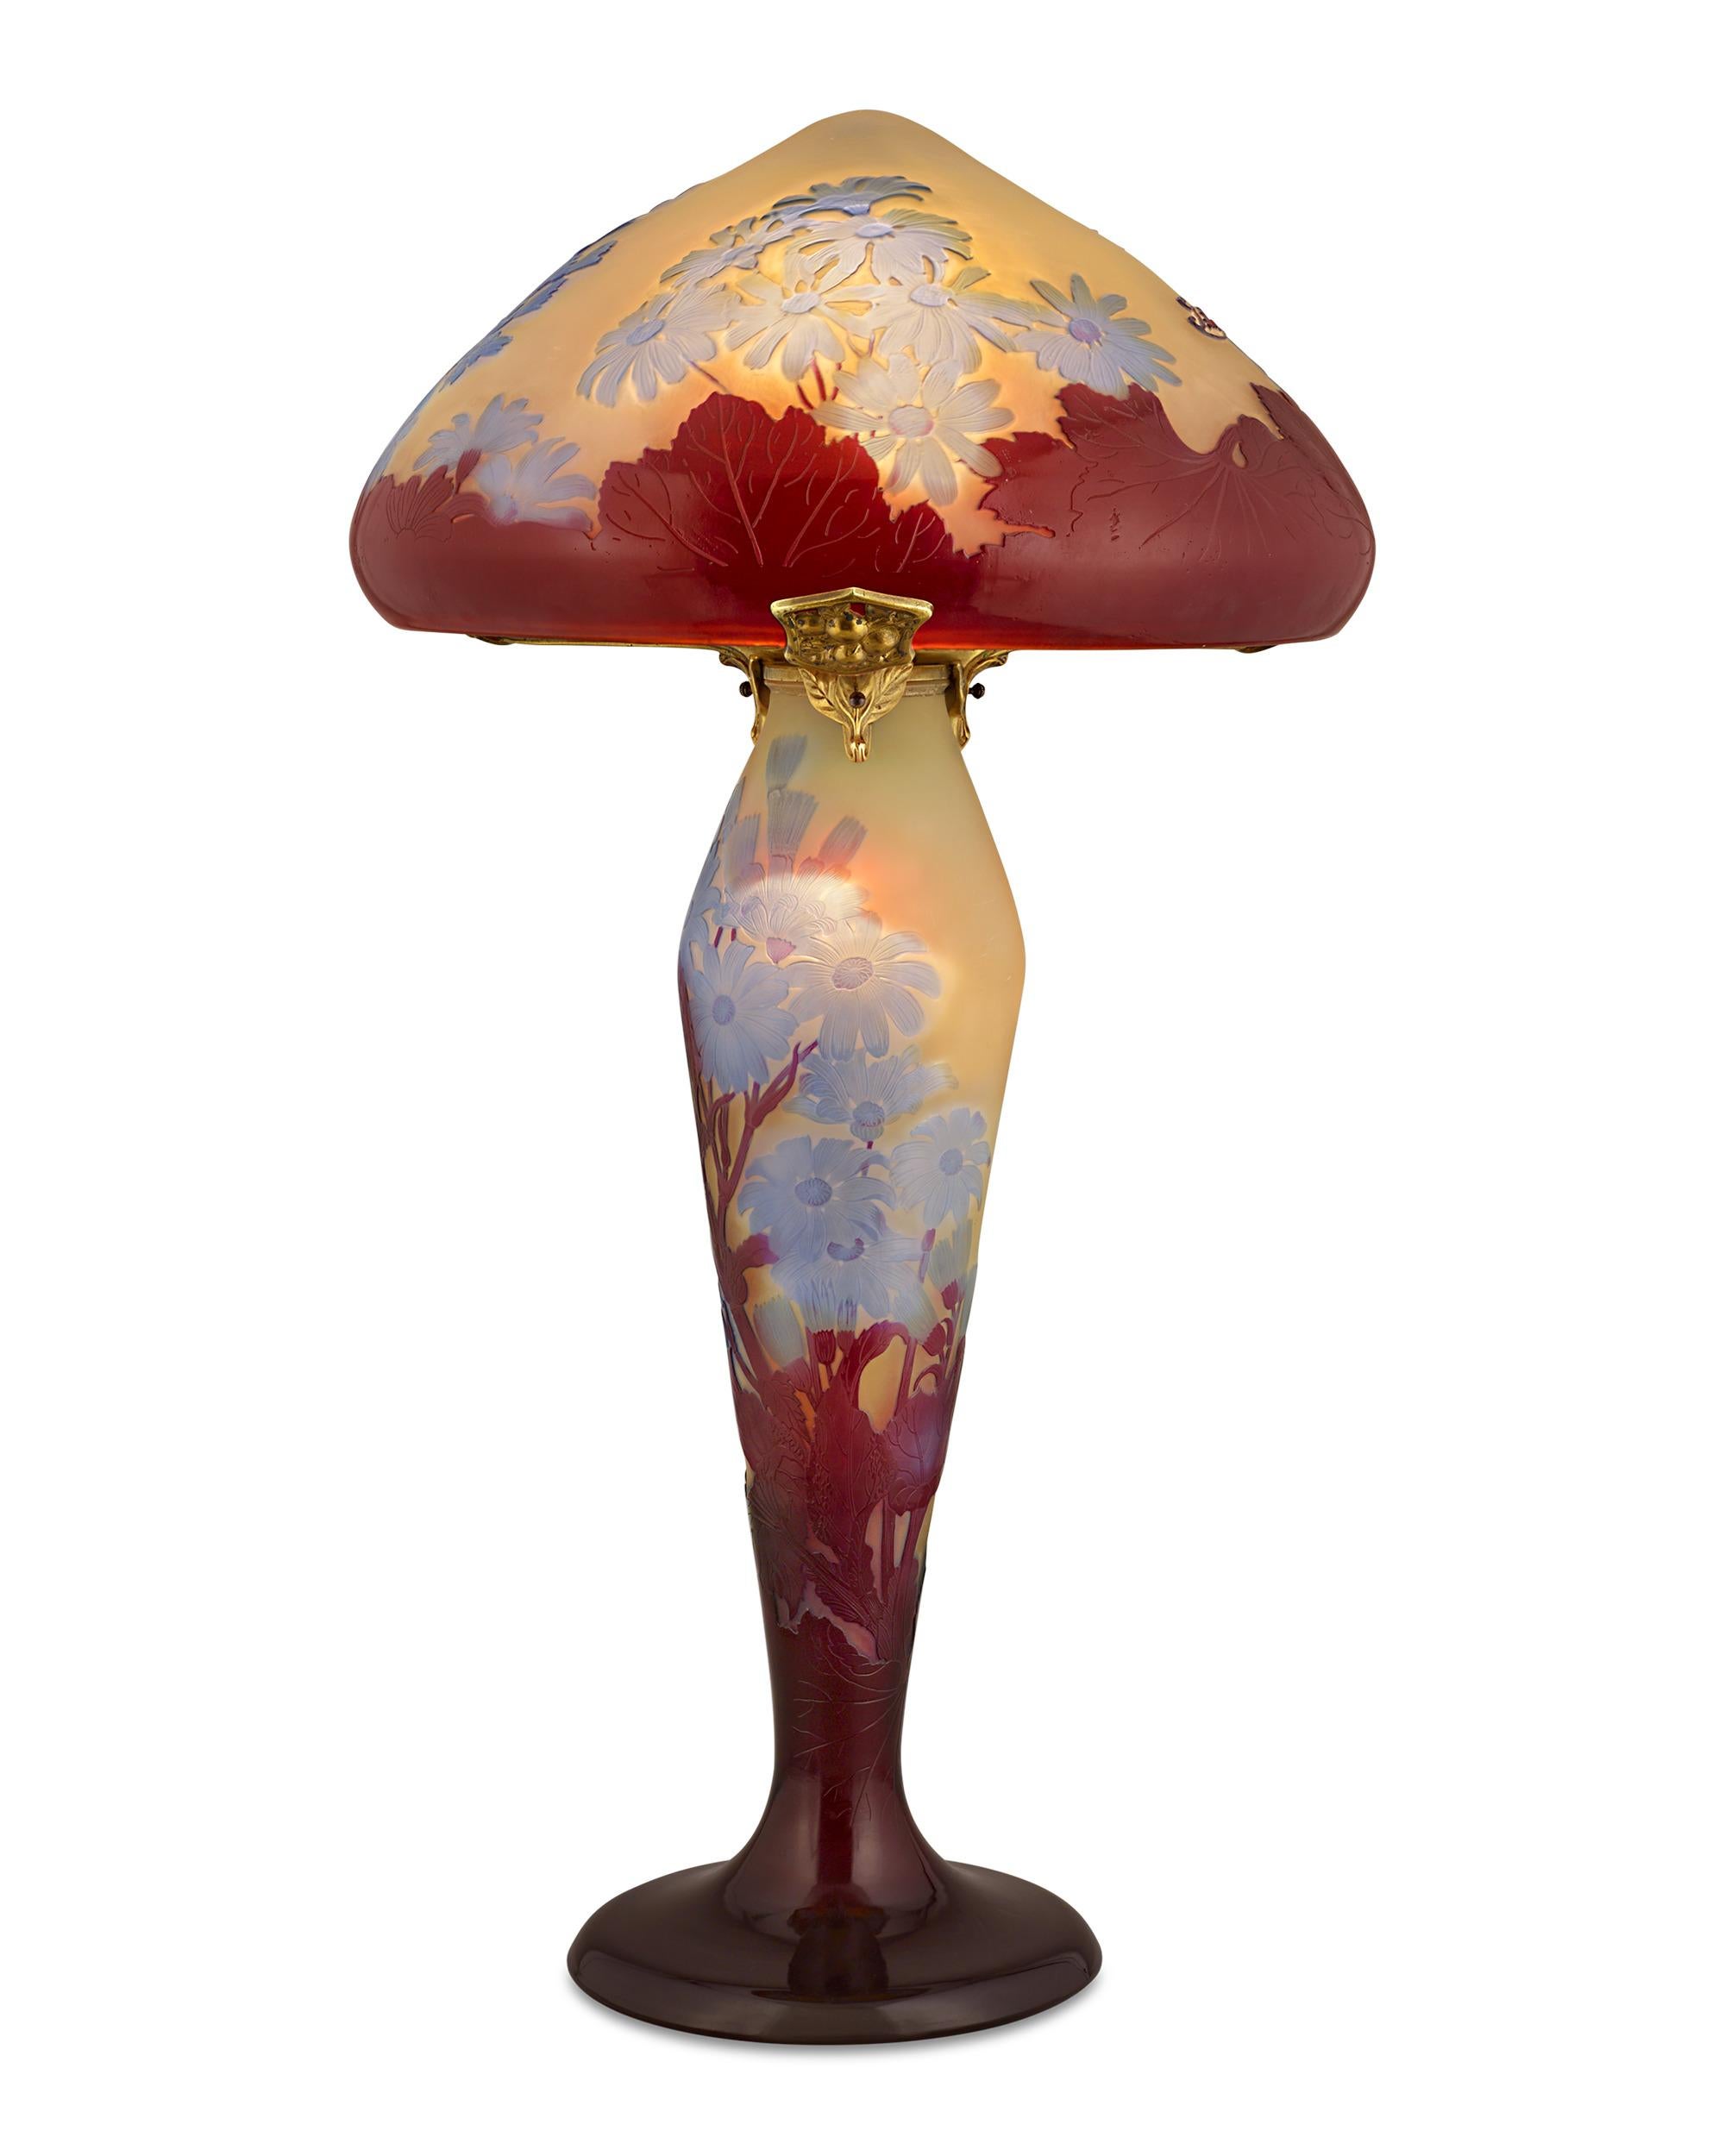 Impressive in both size and artistry, this exceptional cameo glass lamp is the work of the famed Art Nouveau master Émile Gallé, one of the most highly regarded names in French glassmaking. The artist's appreciation of nature is evident in the